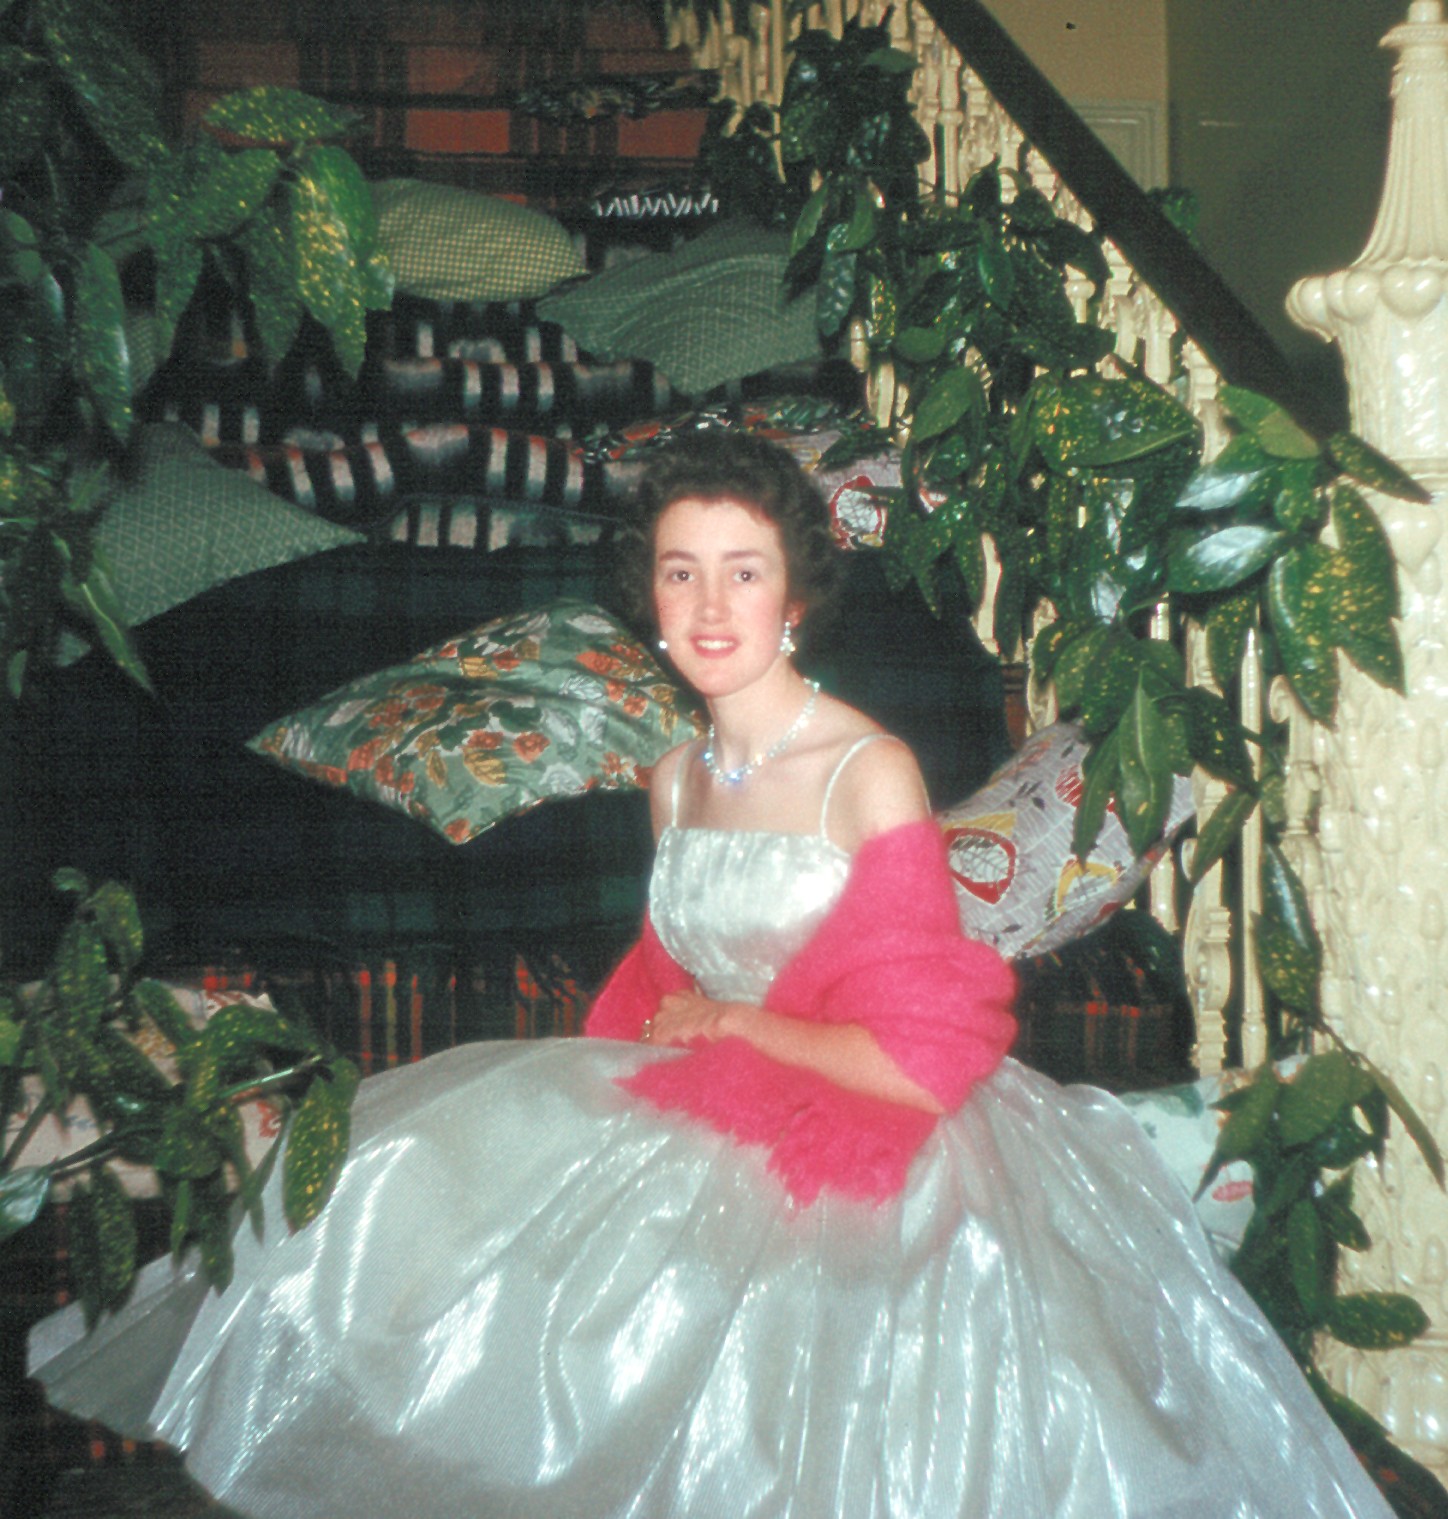 5900129s 1 February 1959 - Betty on the stairs at the Ashburne formal ball.